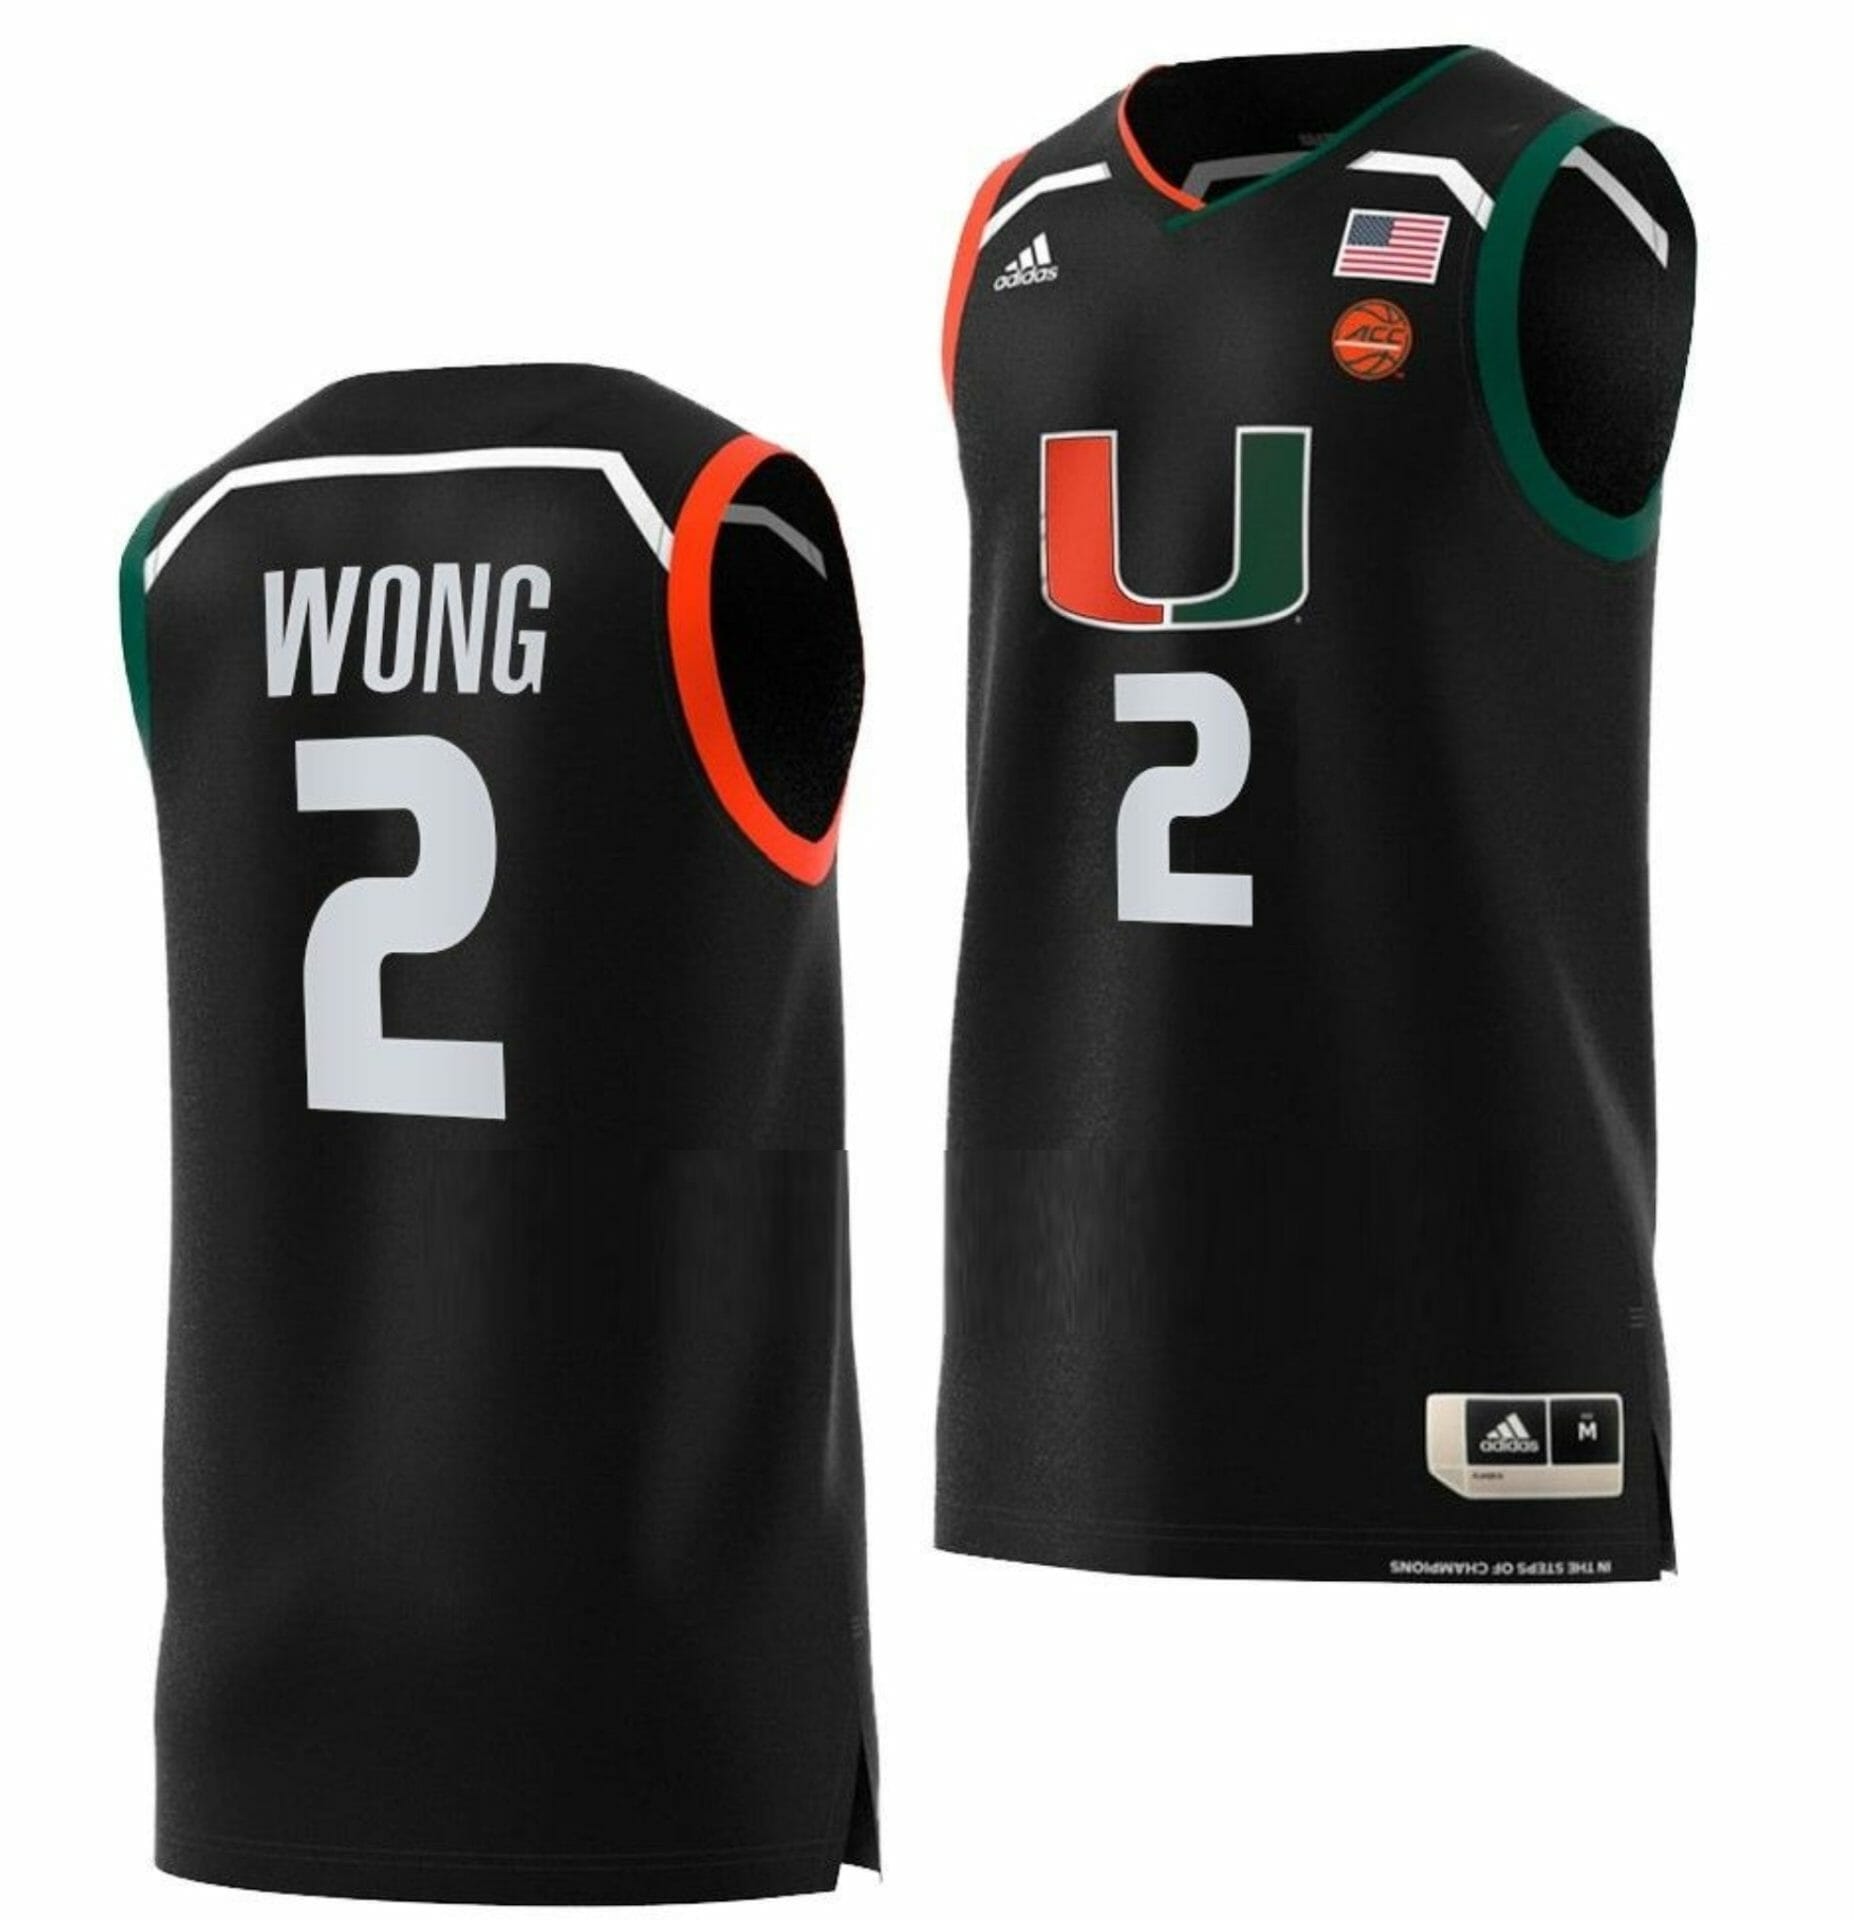 Miami Hurricanes adidas Honoring Black Excellence Basketball Jersey 